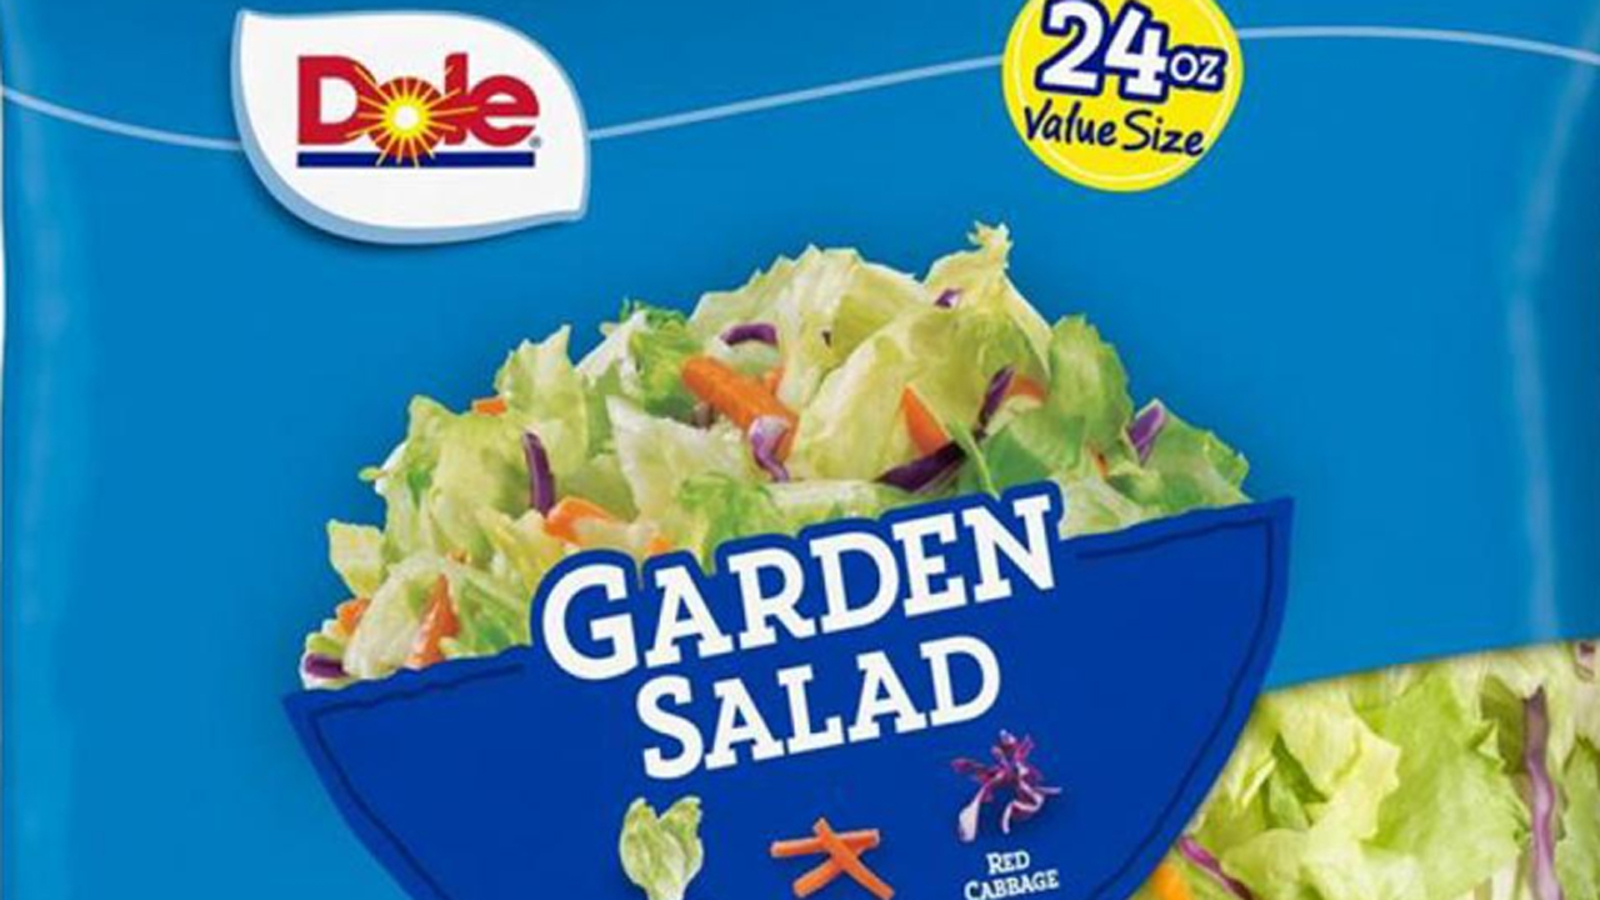 A picture of a bag of Dole fresh mix salad